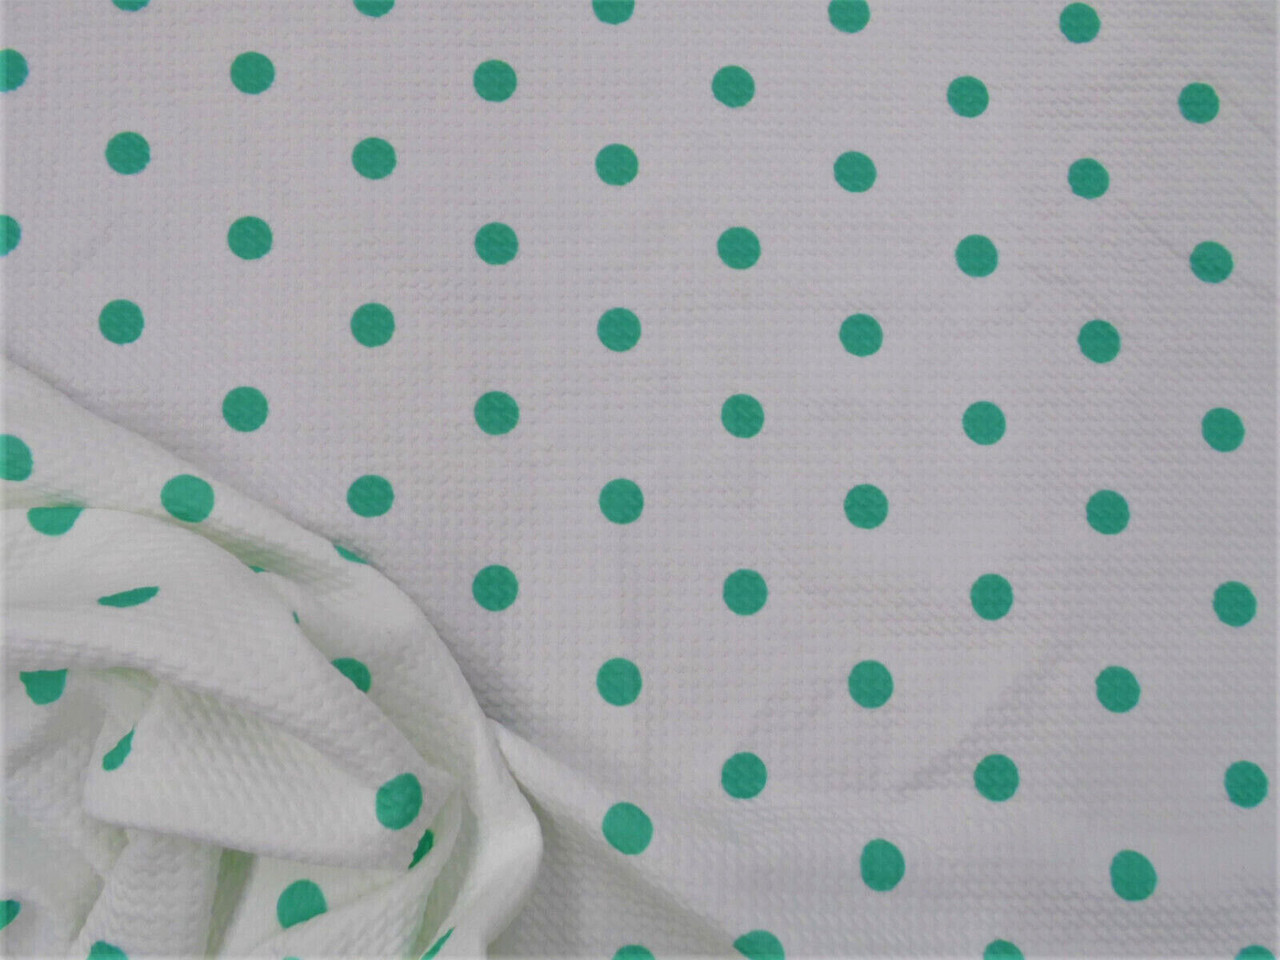 Bullet Printed Liverpool Textured Fabric Stretch White Mint Green Small Polka Dot R35